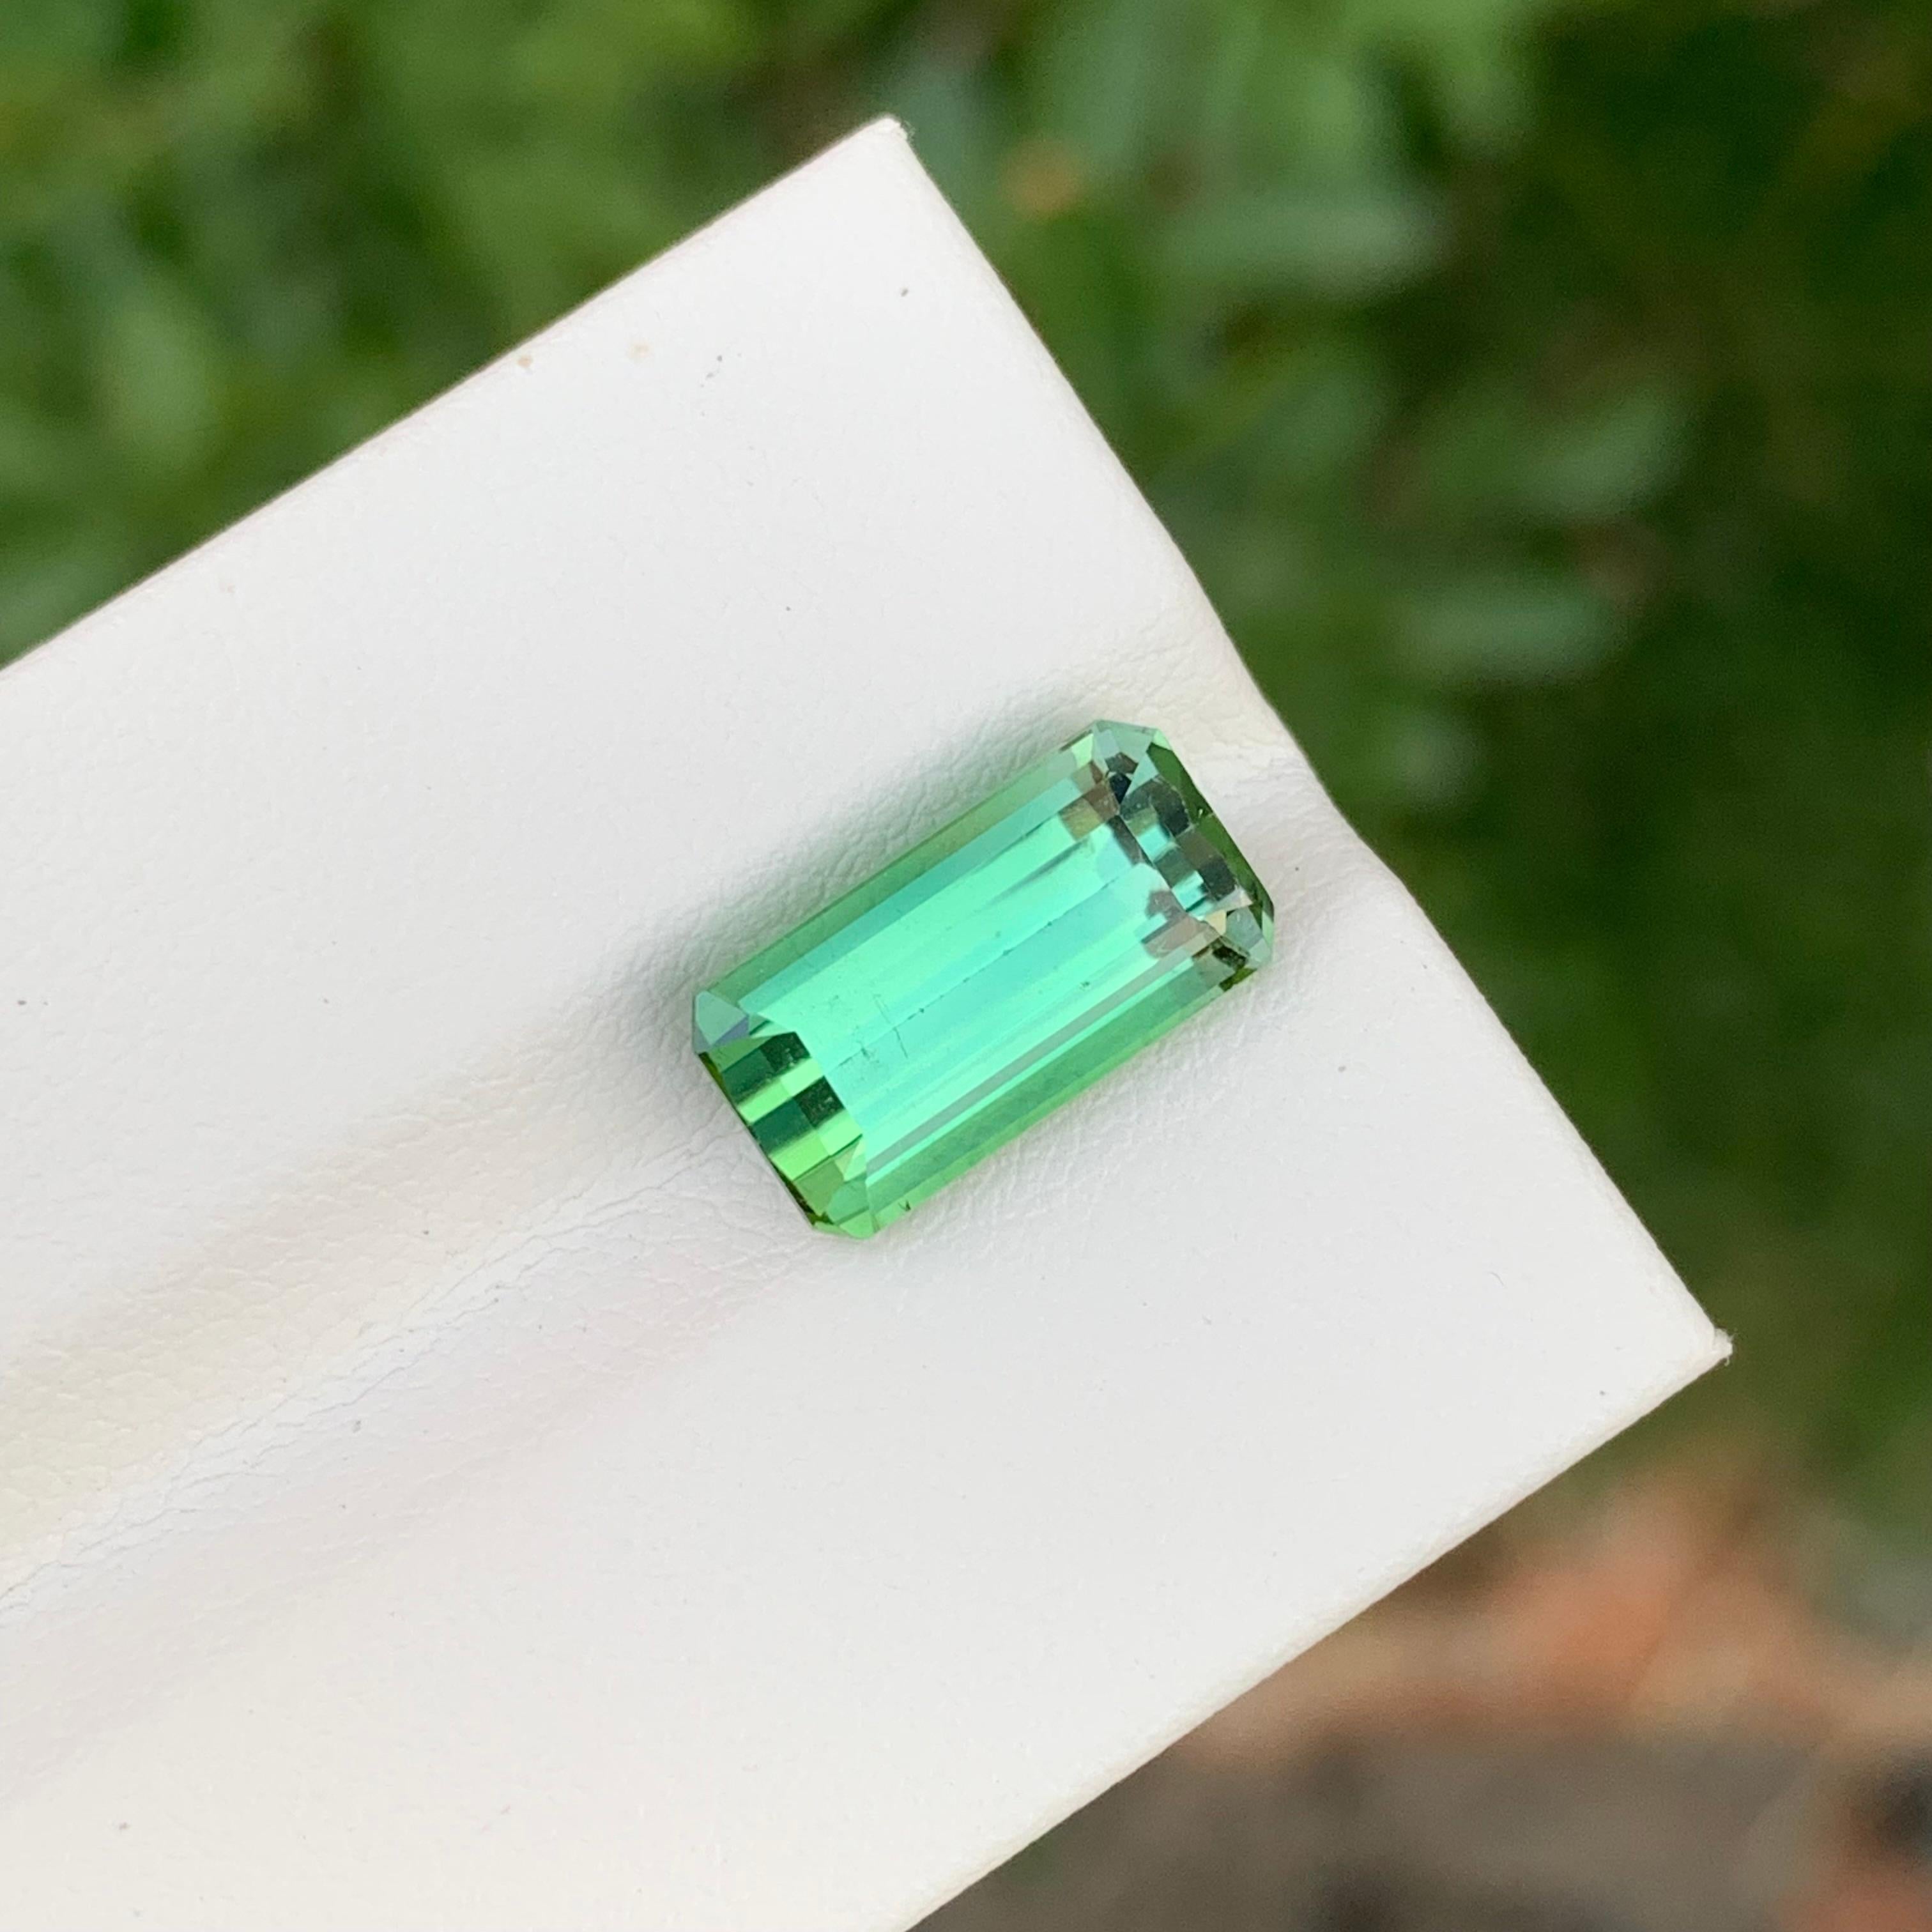 Loose Mint Tourmaline

Weight: 4.45 Carats
Dimension: 12.6 x 6.6 x 5.8 Mm
Colour: Mint Green 
Origin: Afghanistan 
Certificate: On Demand
Treatment: Non

Tourmaline is a captivating gemstone known for its remarkable variety of colors, making it a